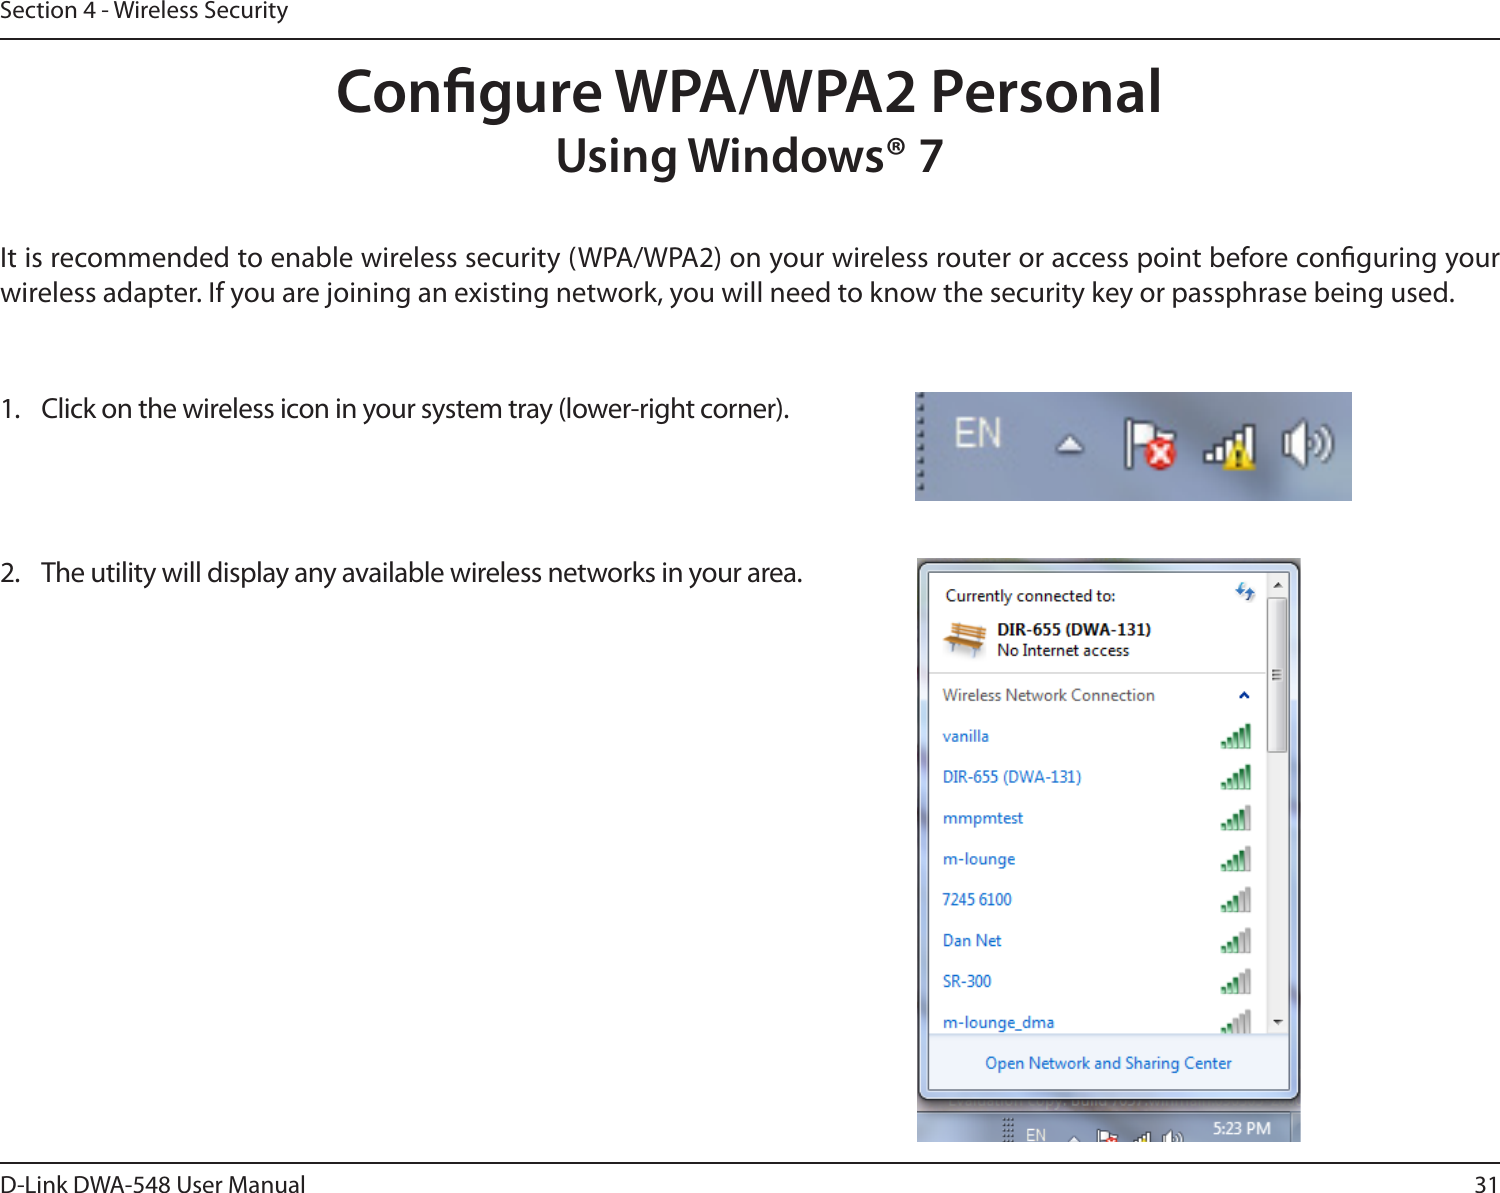 31D-Link DWA-548 User ManualSection 4 - Wireless SecurityCongure WPA/WPA2 PersonalUsing Windows® 7It is recommended to enable wireless security (WPA/WPA2) on your wireless router or access point before conguring your wireless adapter. If you are joining an existing network, you will need to know the security key or passphrase being used.2.  The utility will display any available wireless networks in your area.1.  Click on the wireless icon in your system tray (lower-right corner).